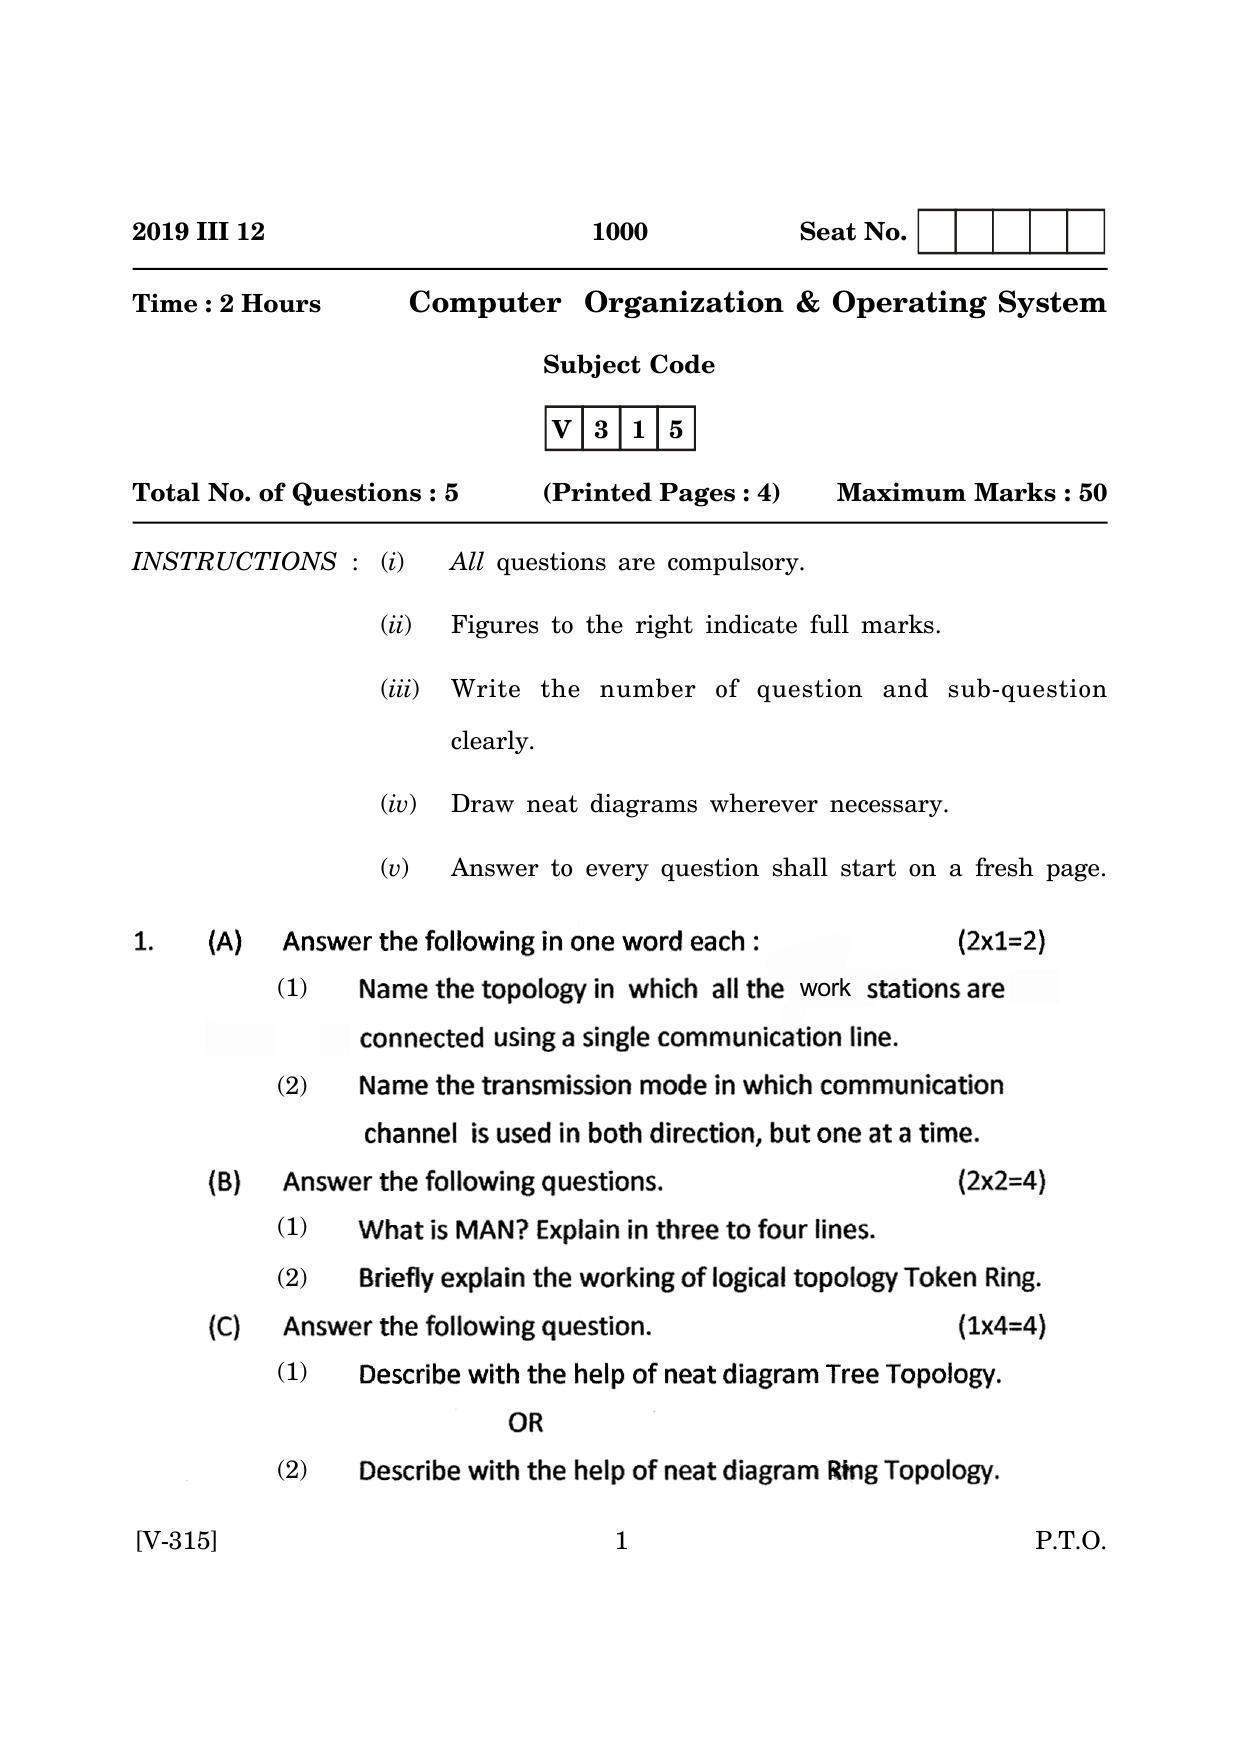 Goa Board Class 12 Computer Organization and Operating System  March 2019 (March 2019) Question Paper - Page 1